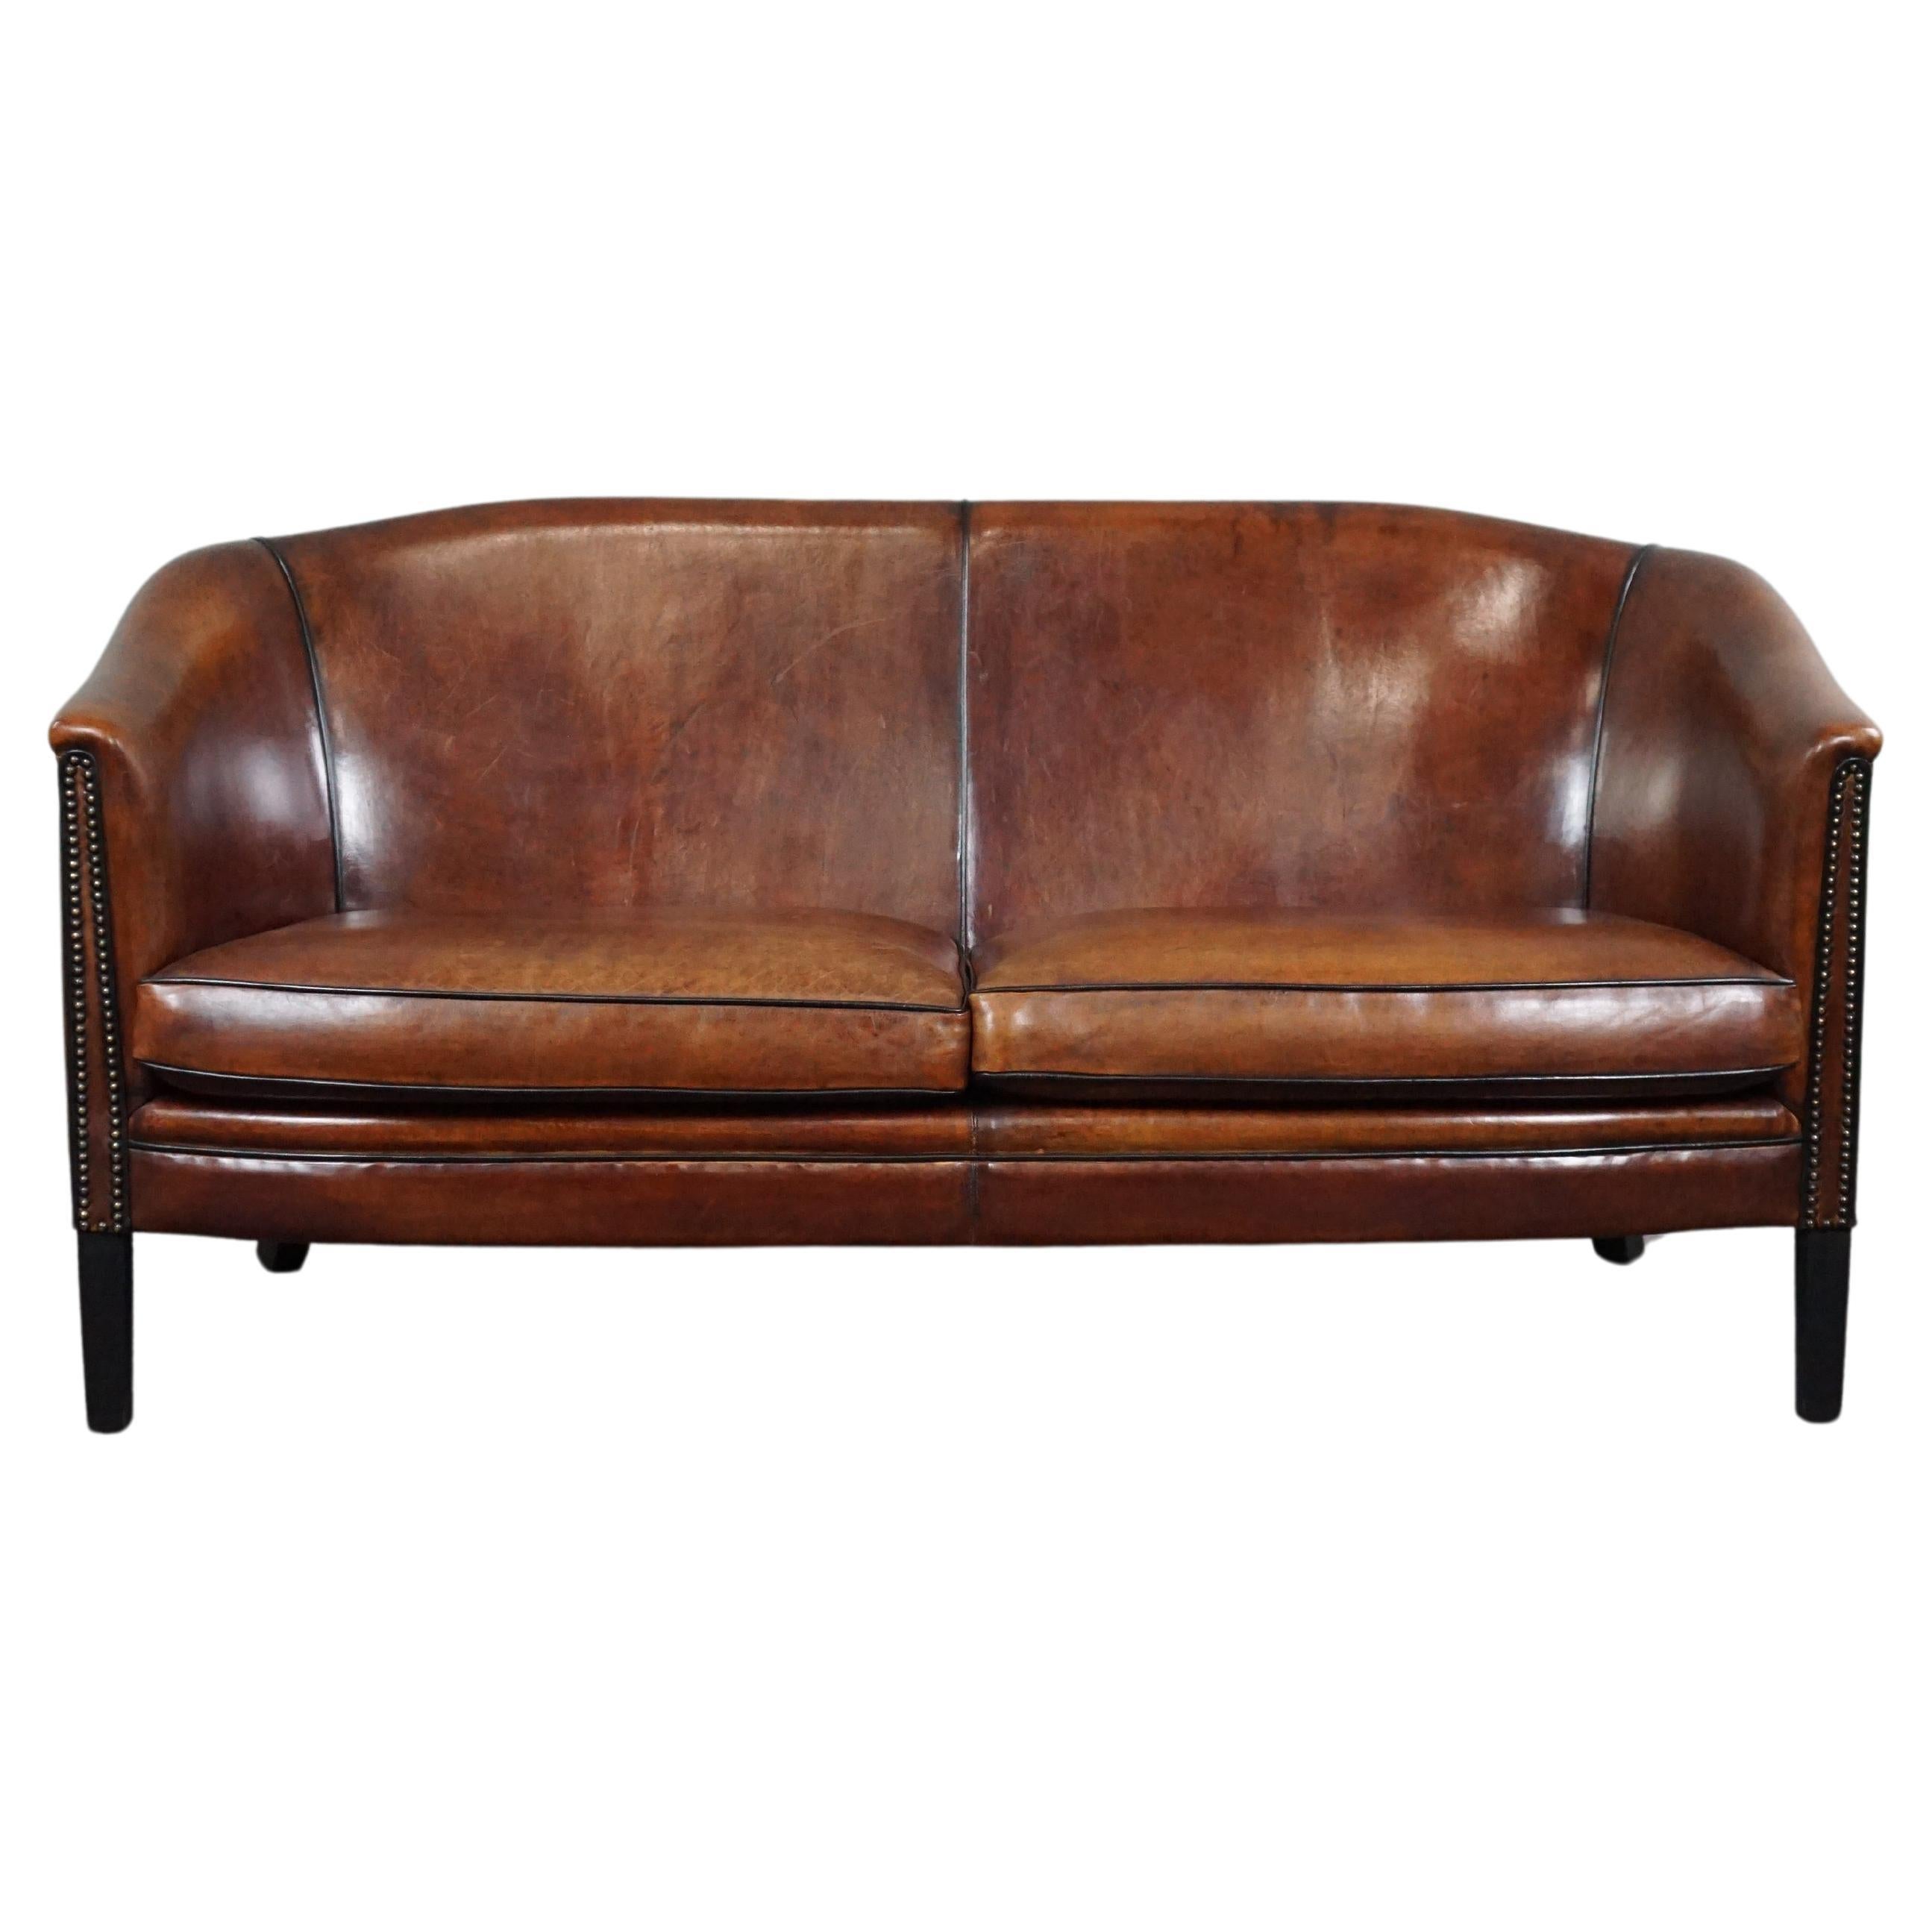 Gracefully shaped sheep leather sofa finished with black piping, spacious 2 seat For Sale